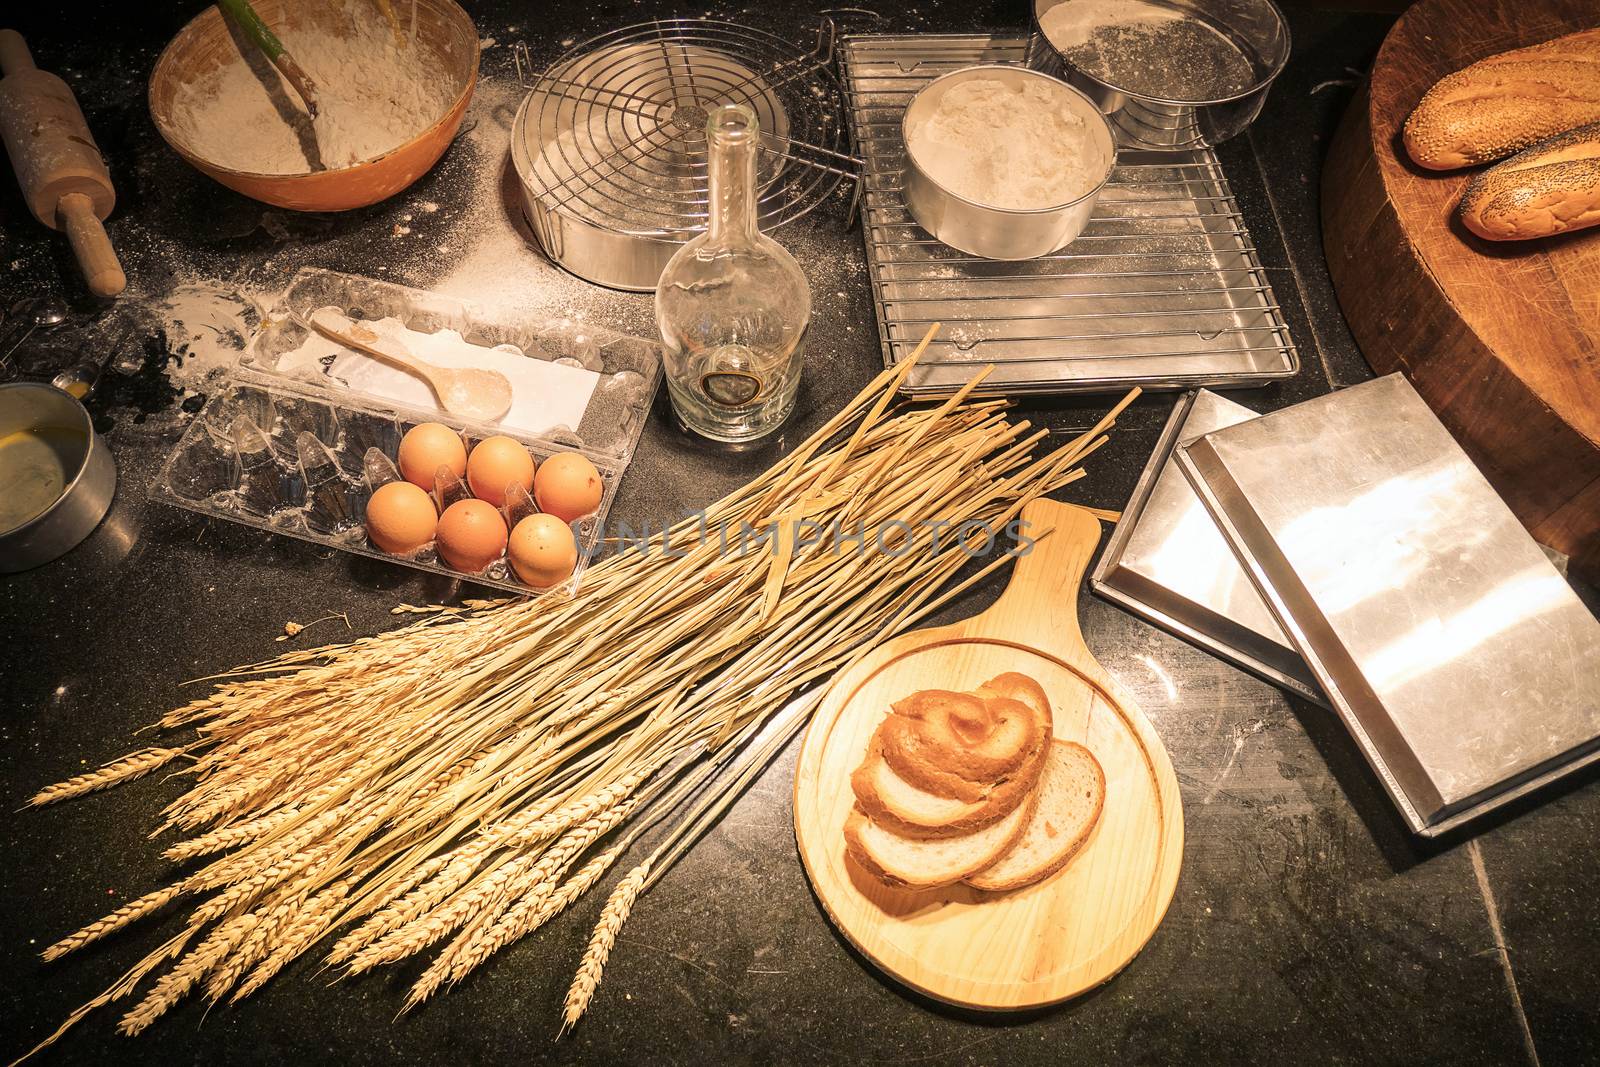 Cluttered kitchen by a beginner of homemade bakery with baking ingredients as flour, rolling pin, whisk, egg shells mesh, and plastic molds for baking. Pile the flour into a bowl with the egg yolk, top view